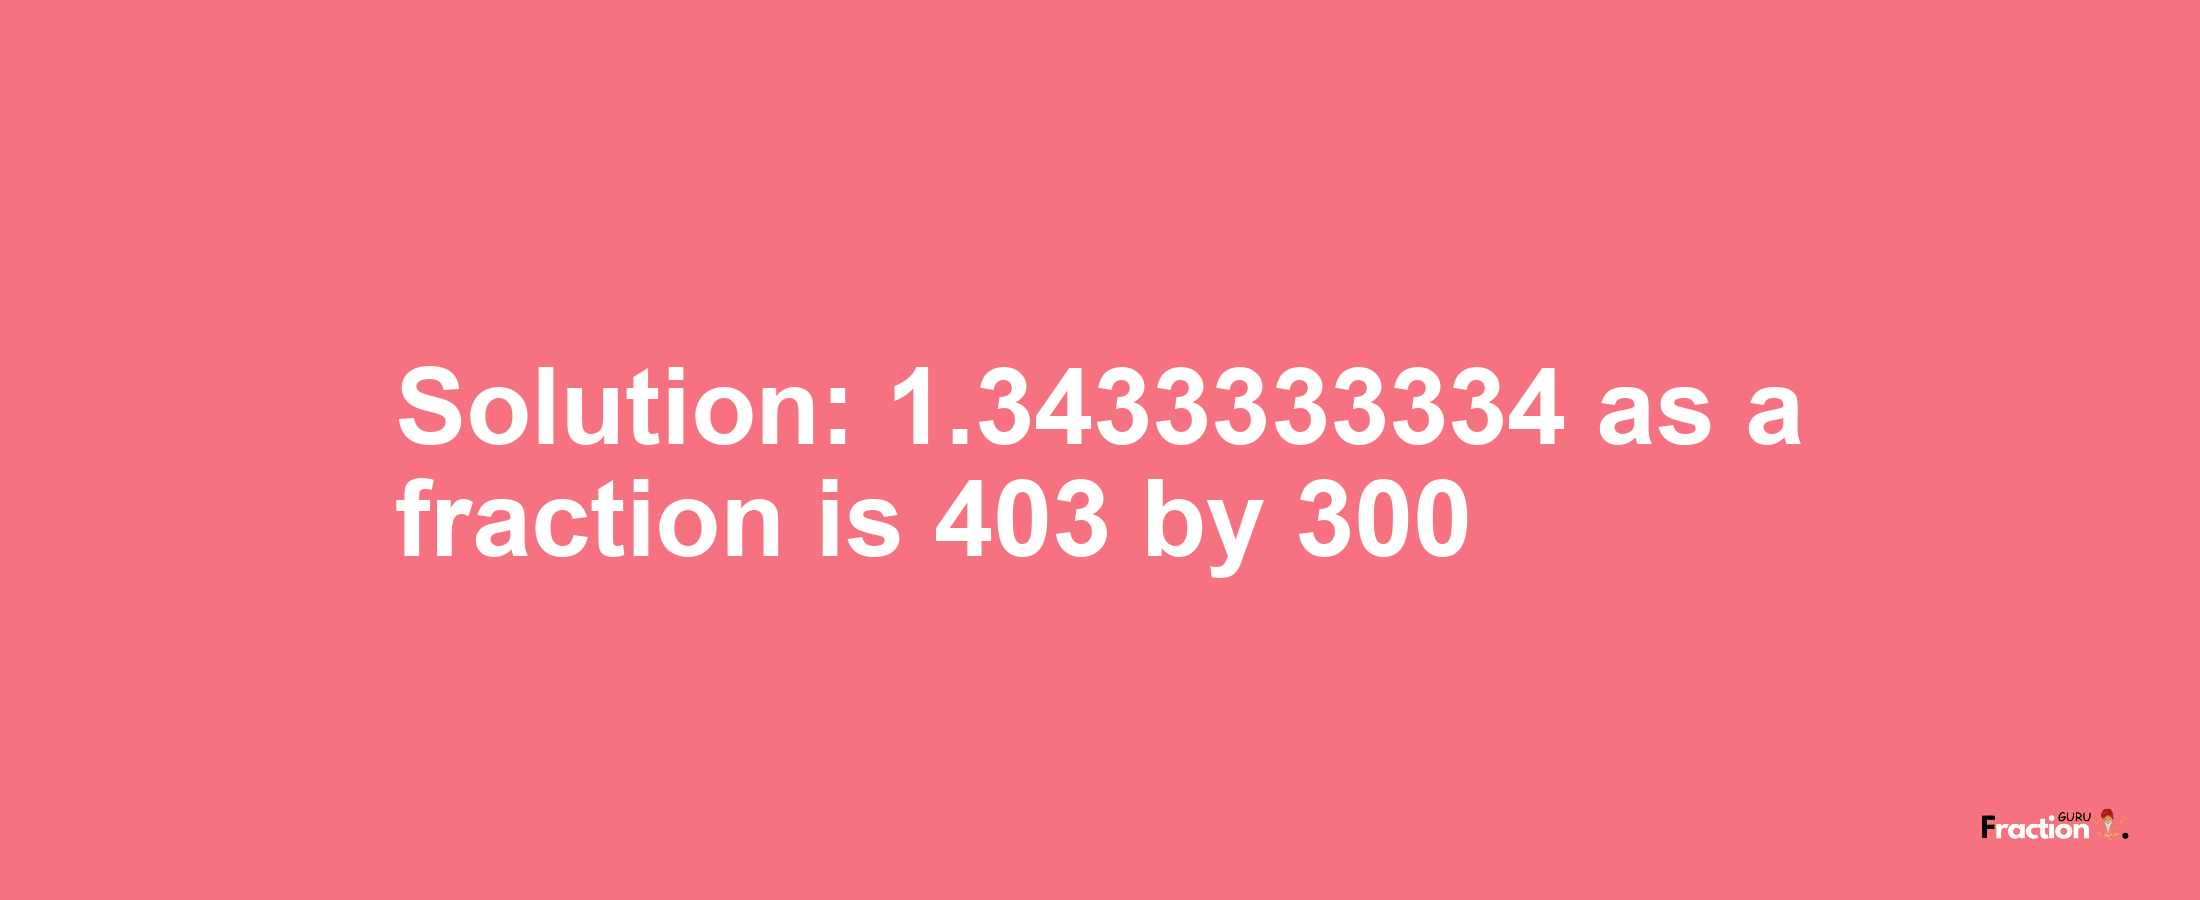 Solution:1.3433333334 as a fraction is 403/300